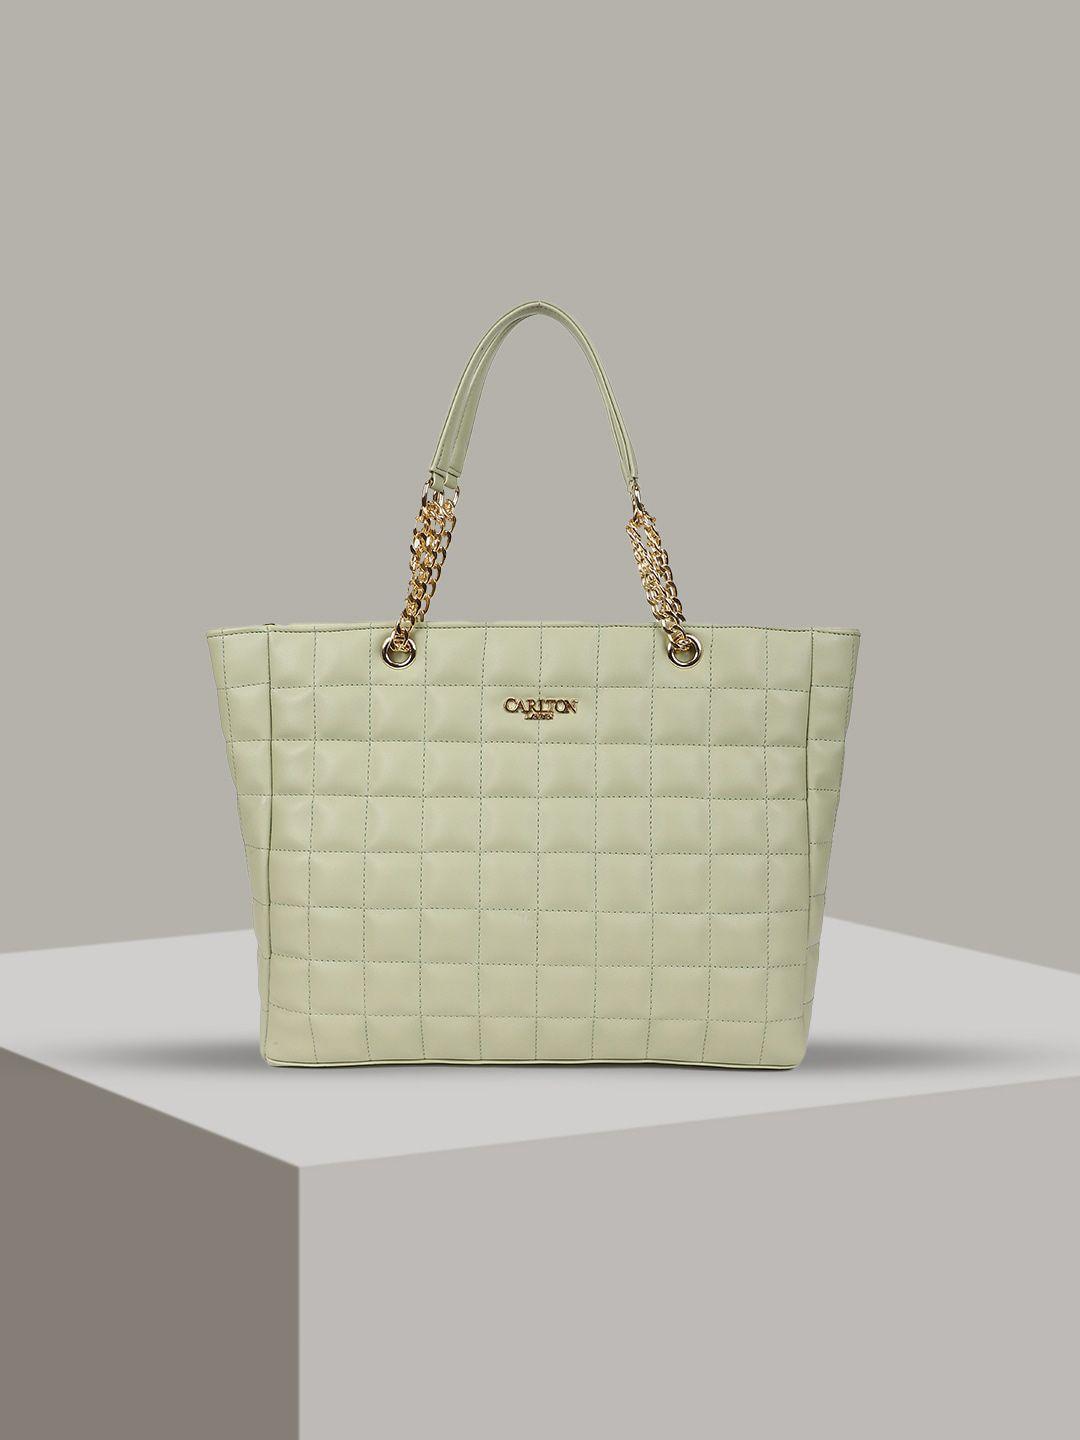 carlton london textured structured handheld bag with quilted